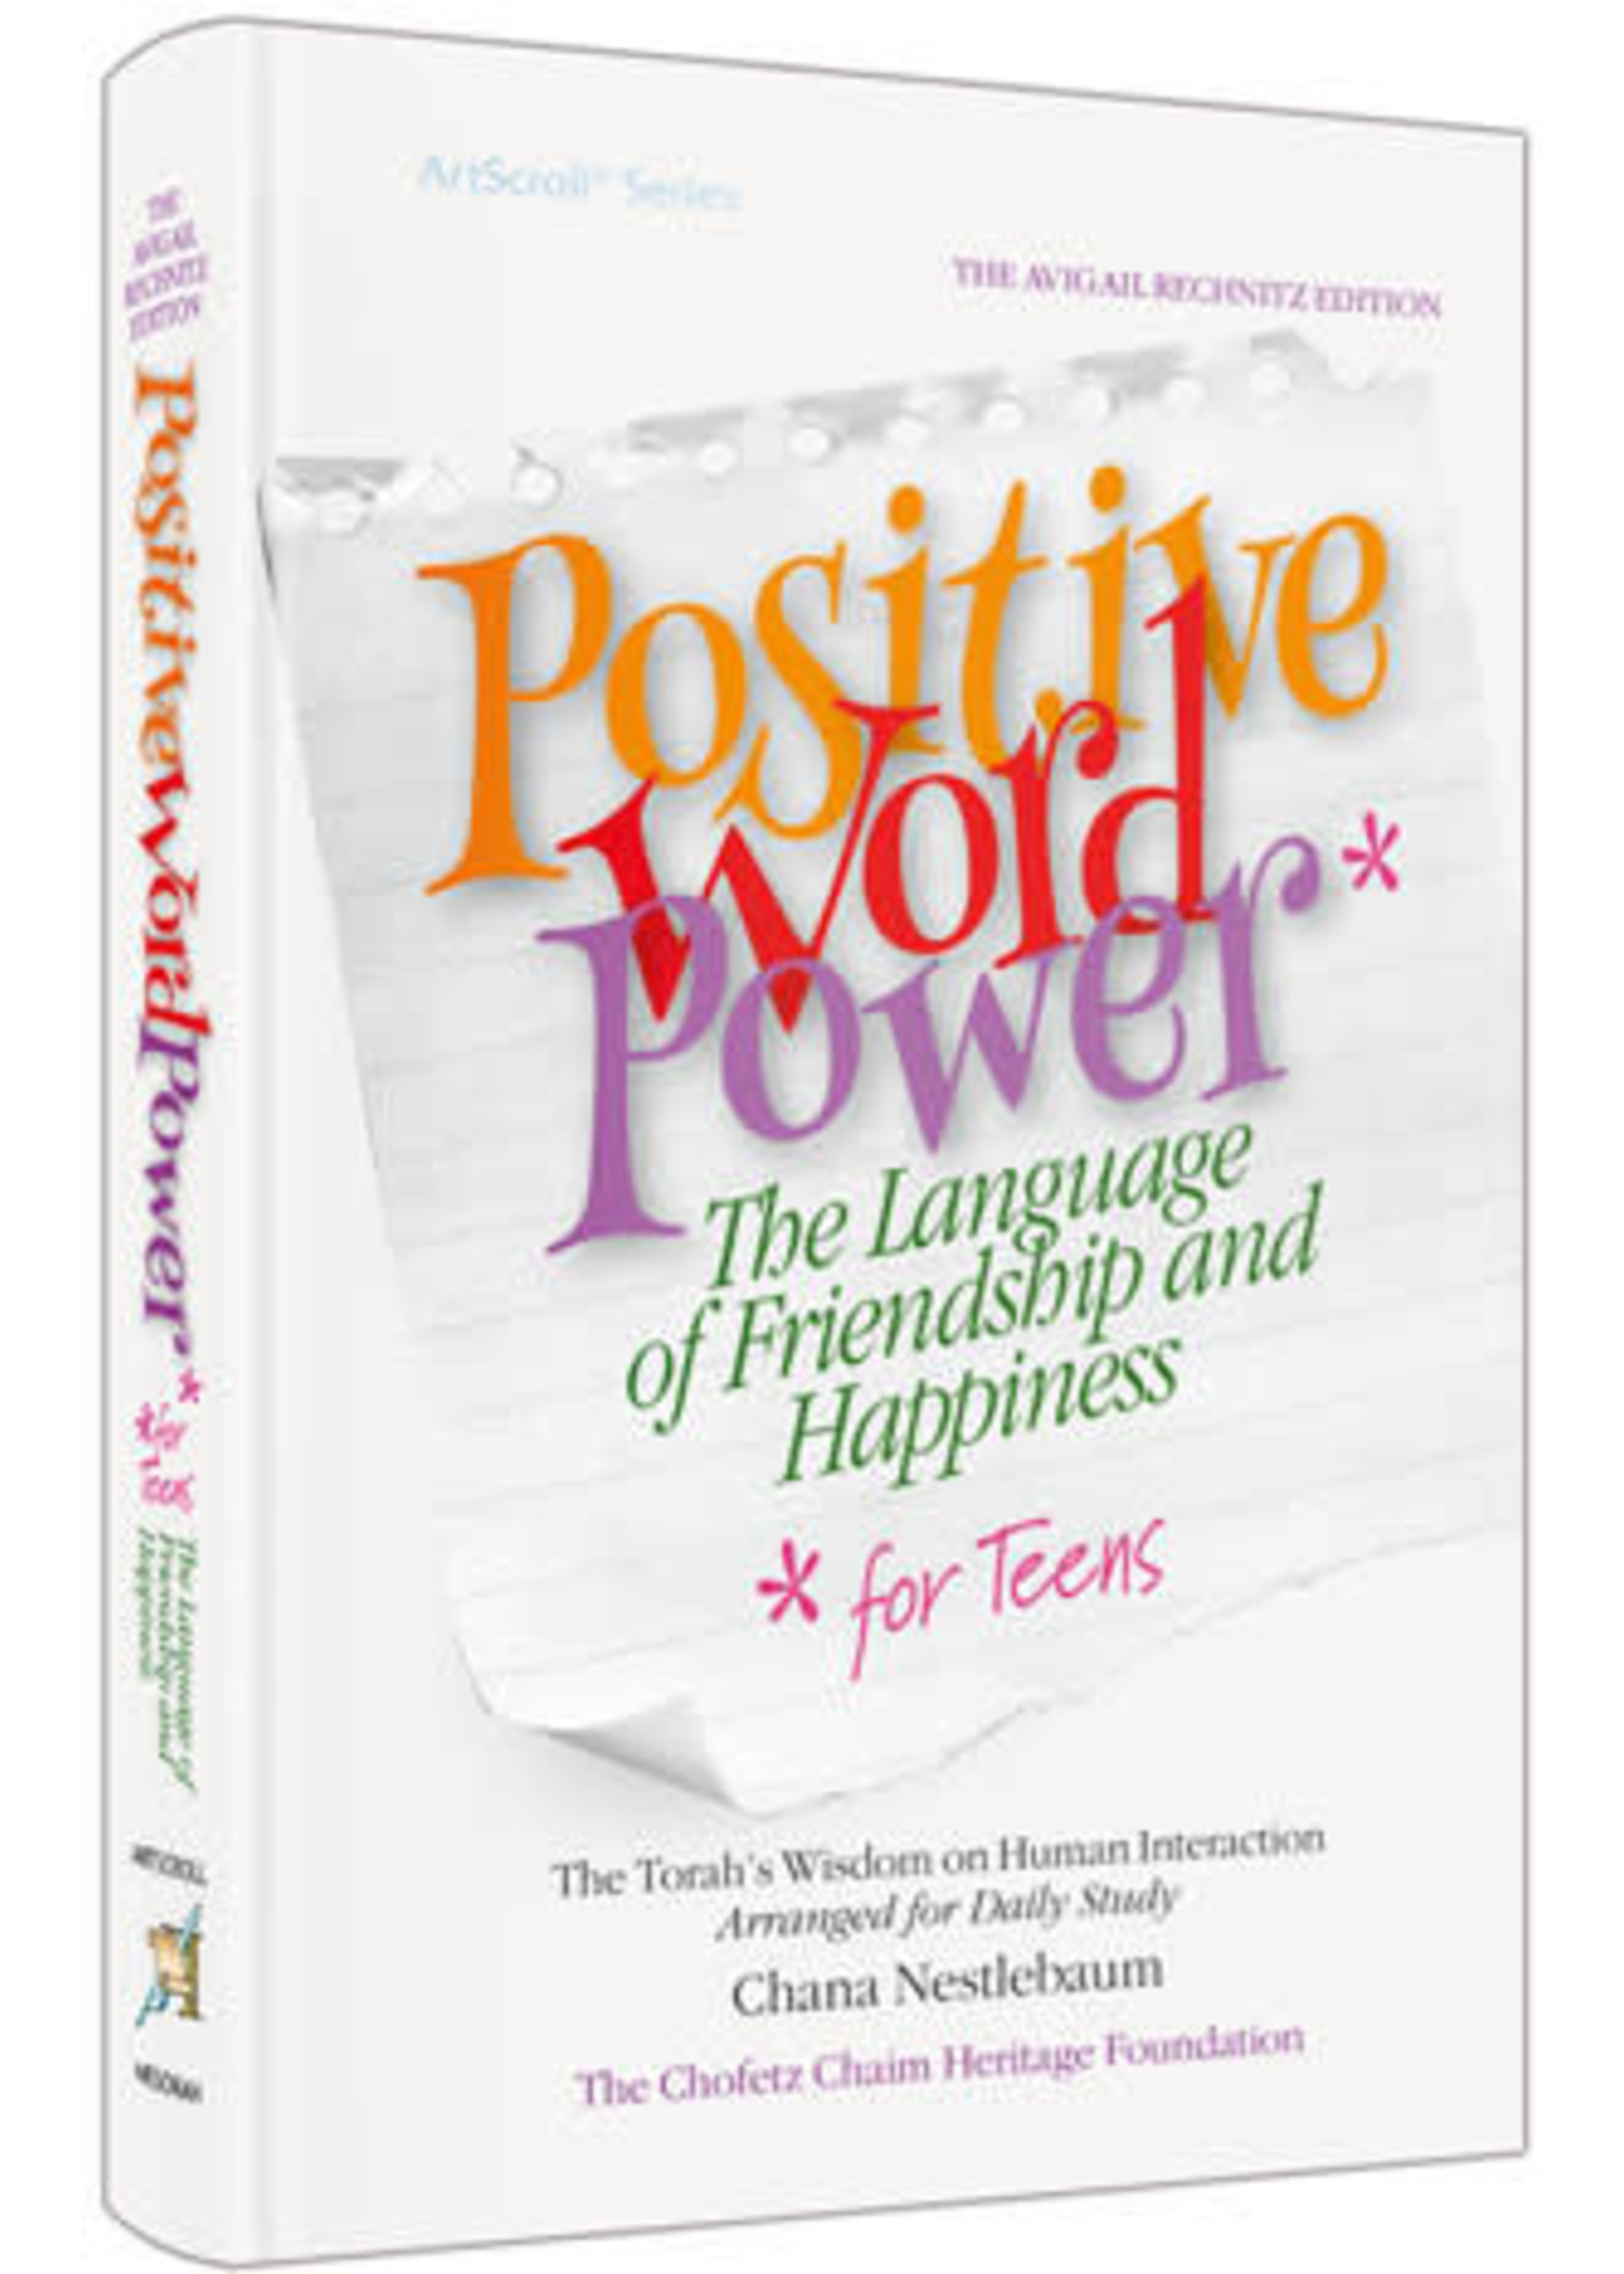 POSITIVE WORD POWER FOR TEENS